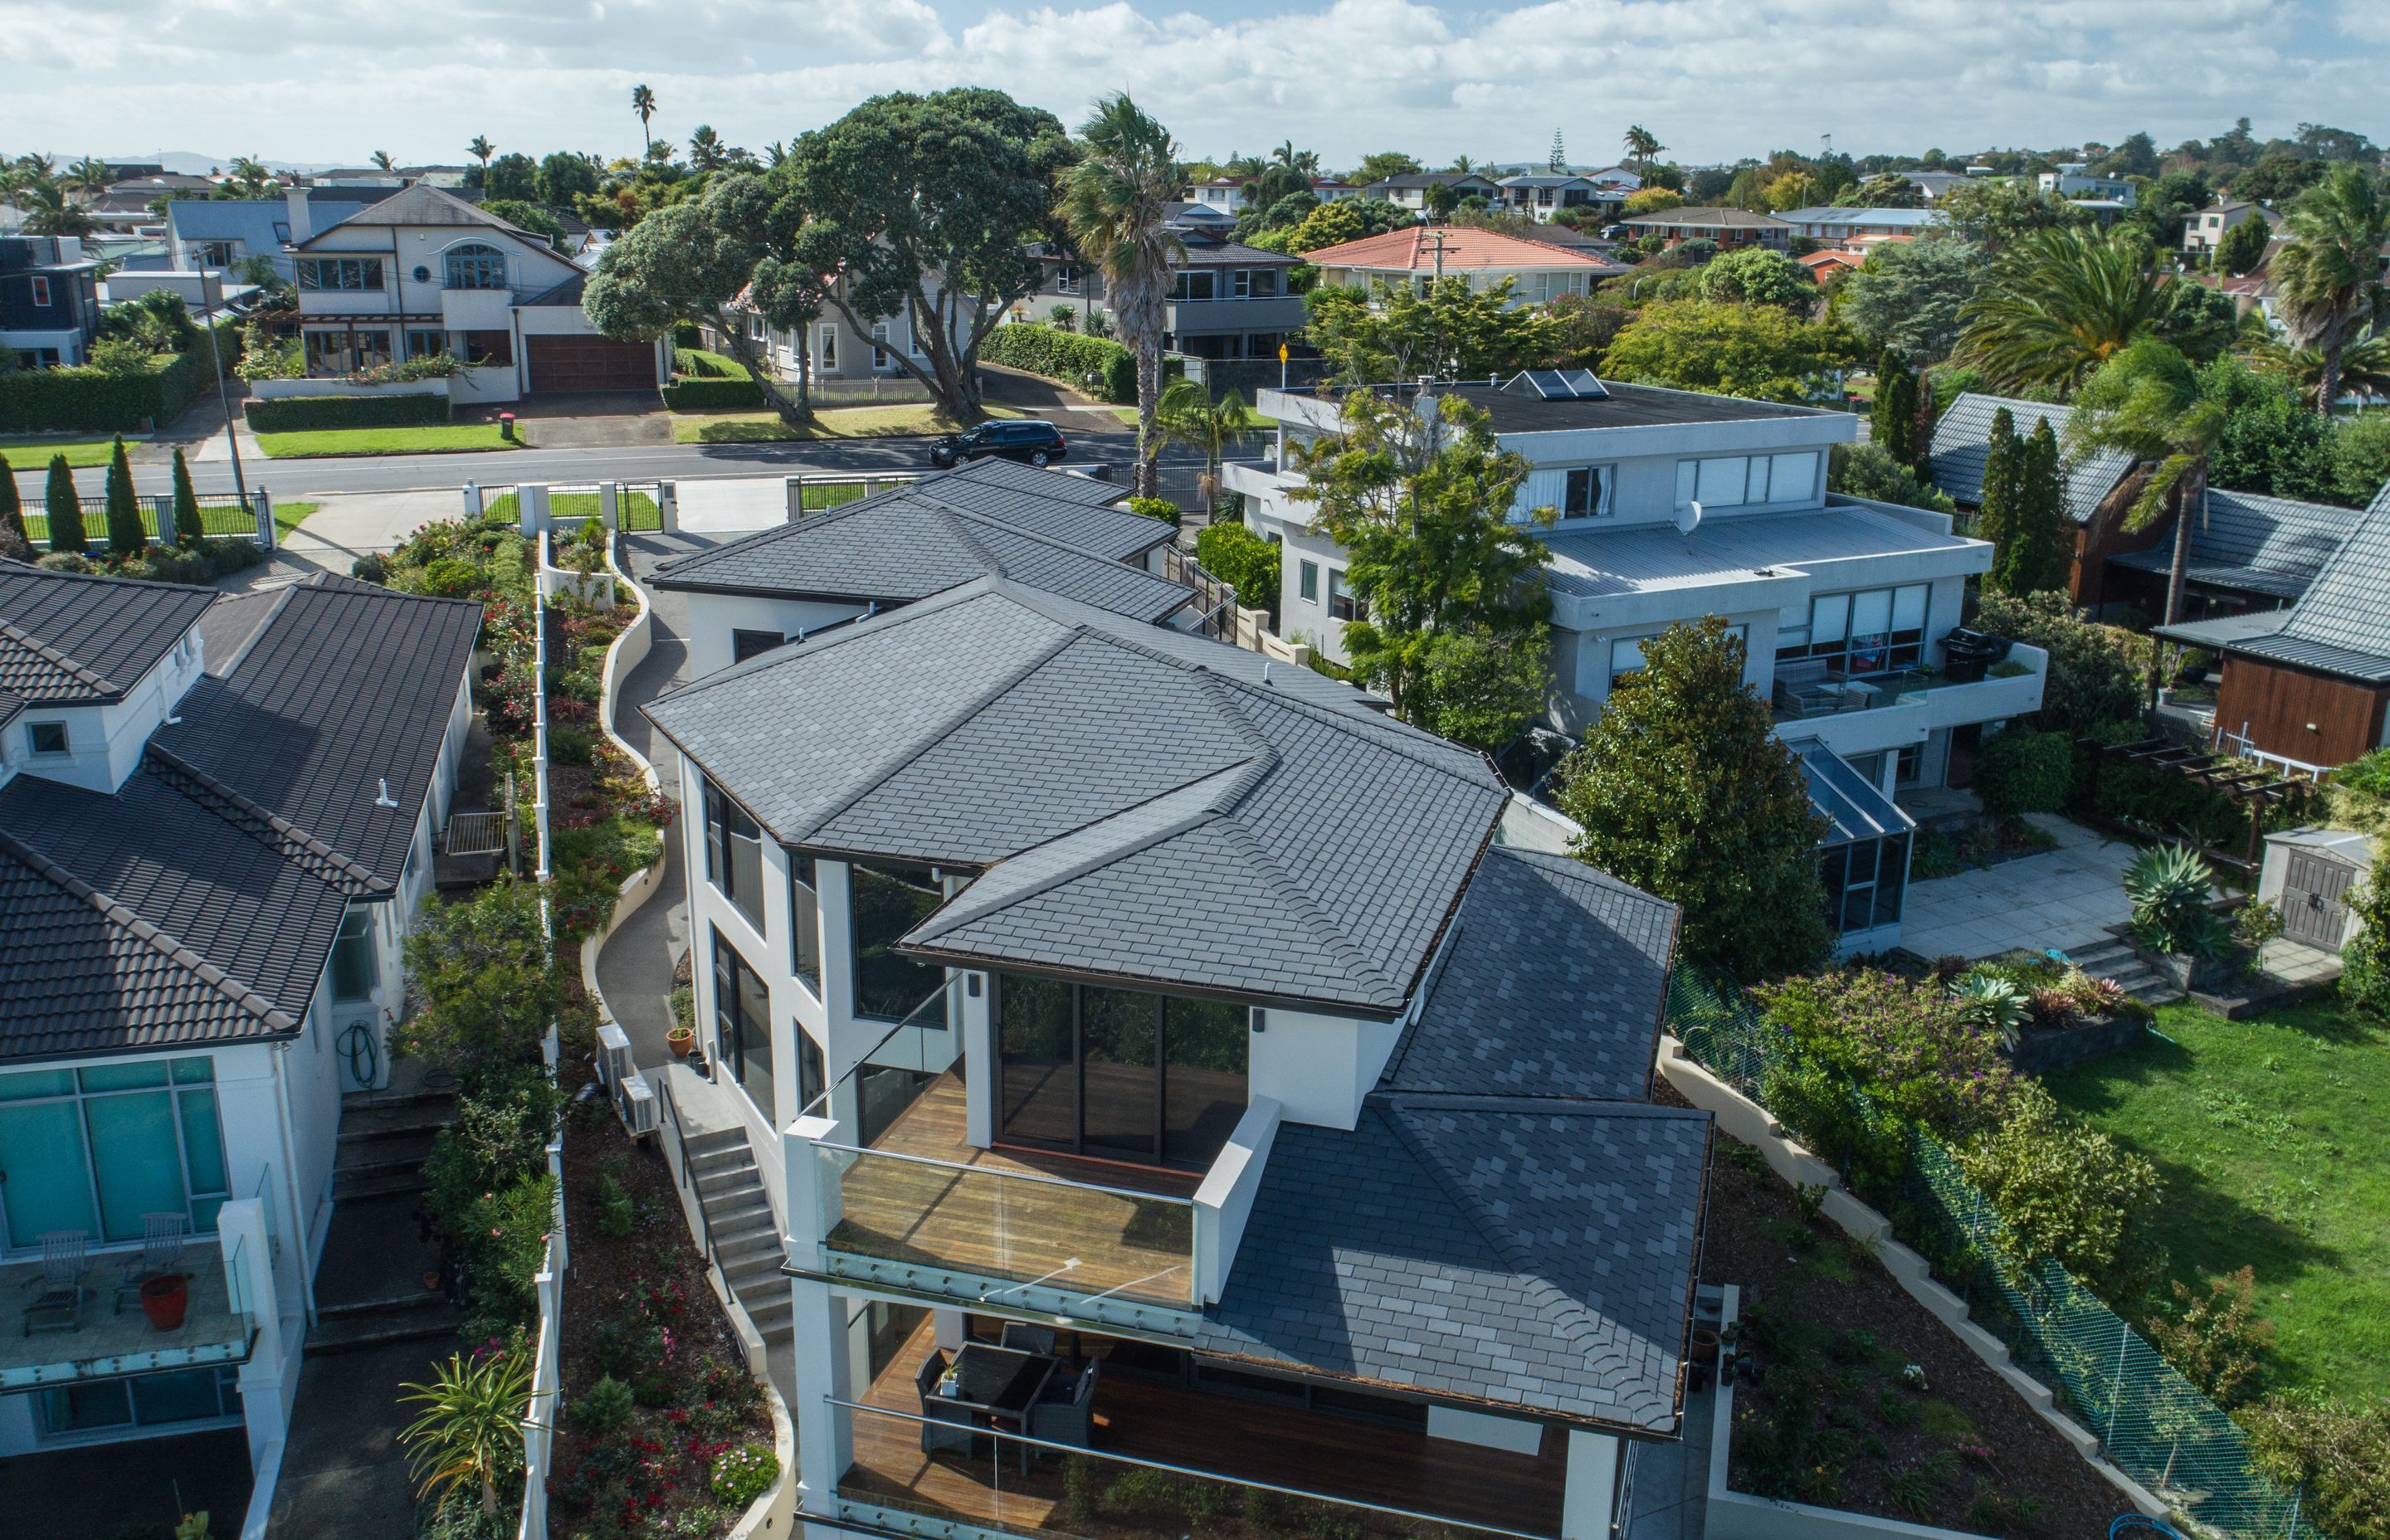 Two different coloured Viking EcoStar tiles were used on the roof of this home to create visual interest.